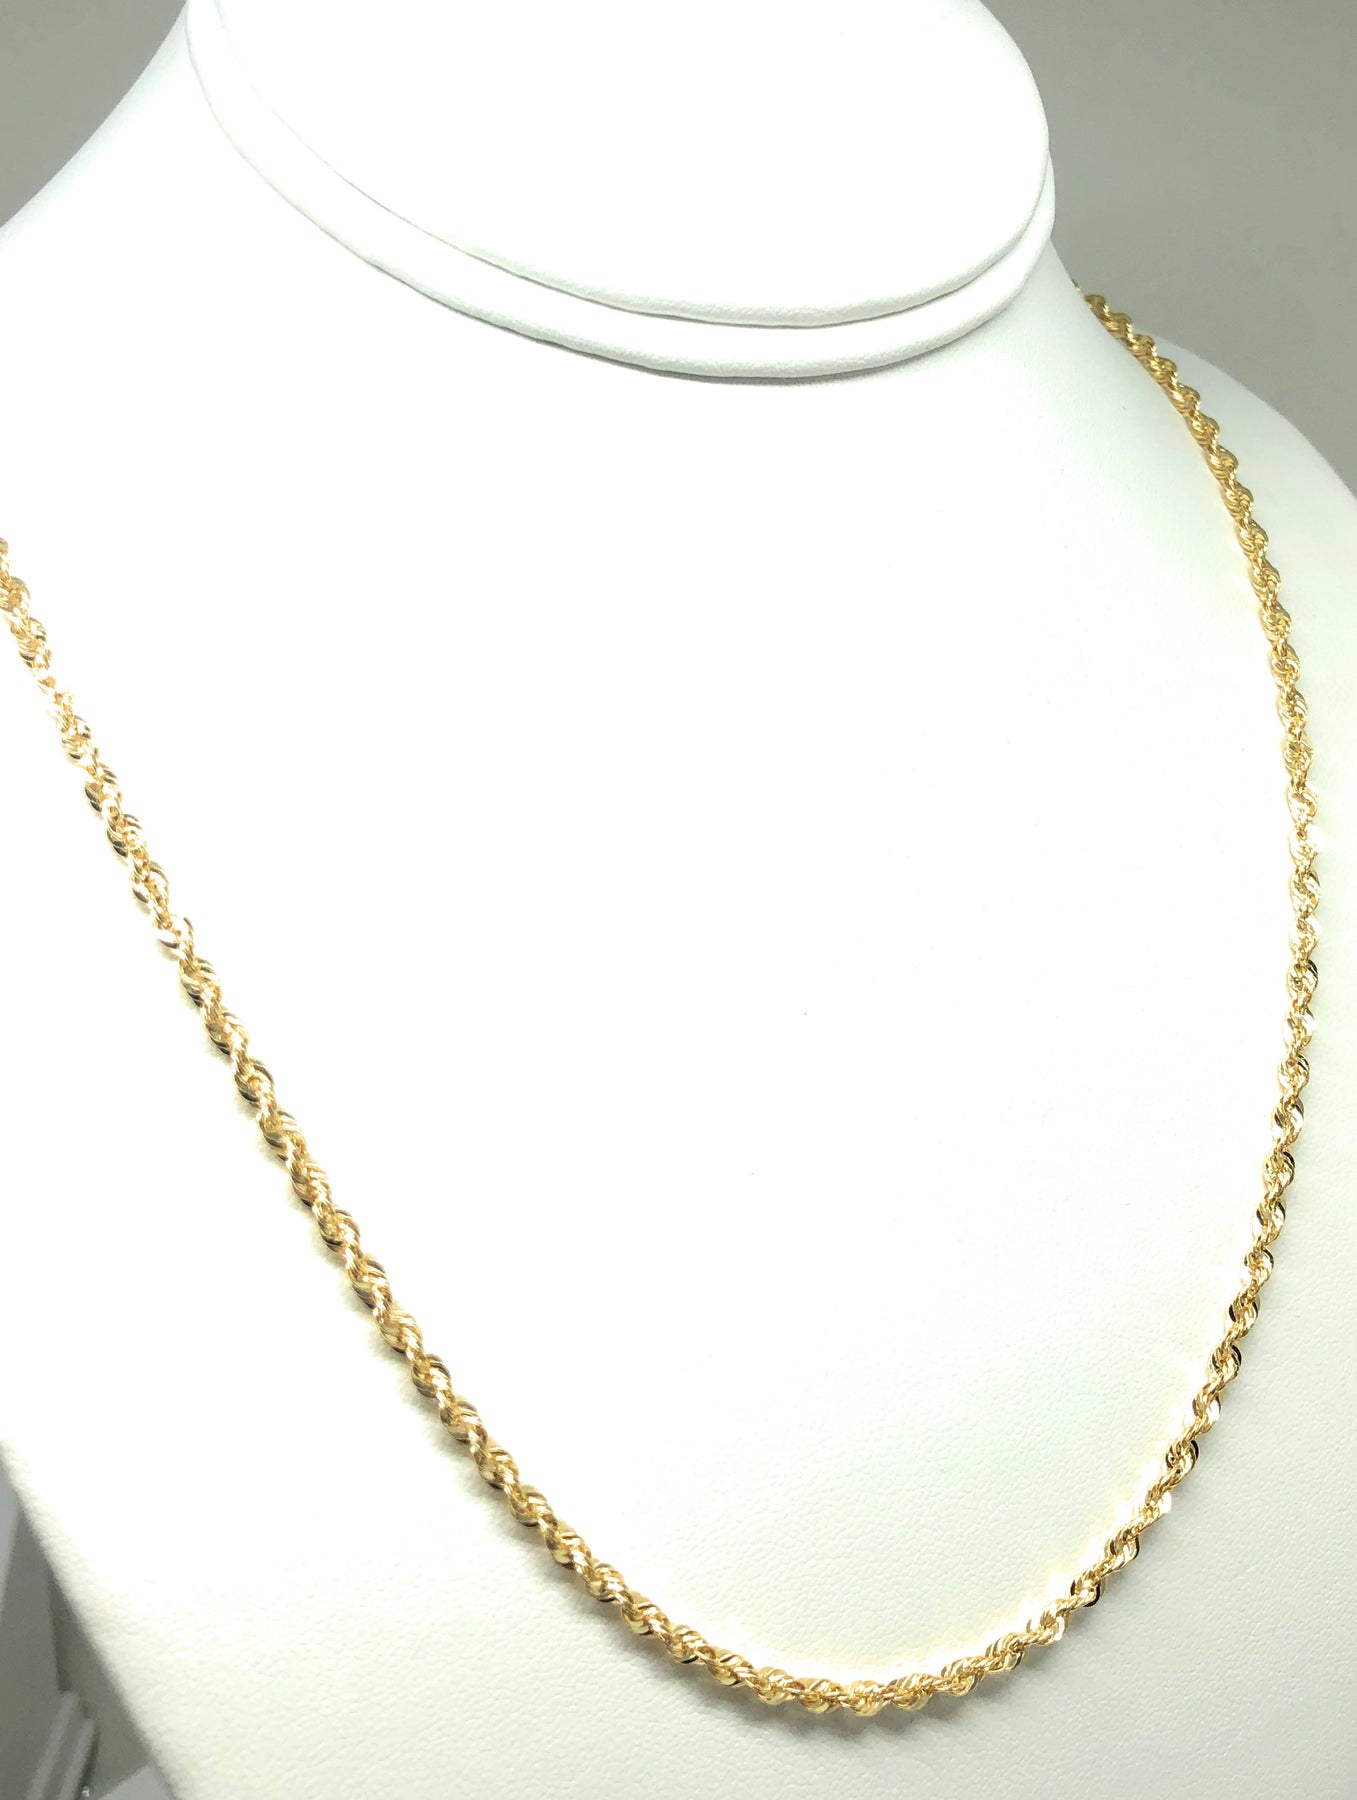 14K Solid Gold Yellow Rope Chain 20-24 Inches 3-3.3mm (Semi-Hollow Style) 26 inch - 3mm Width